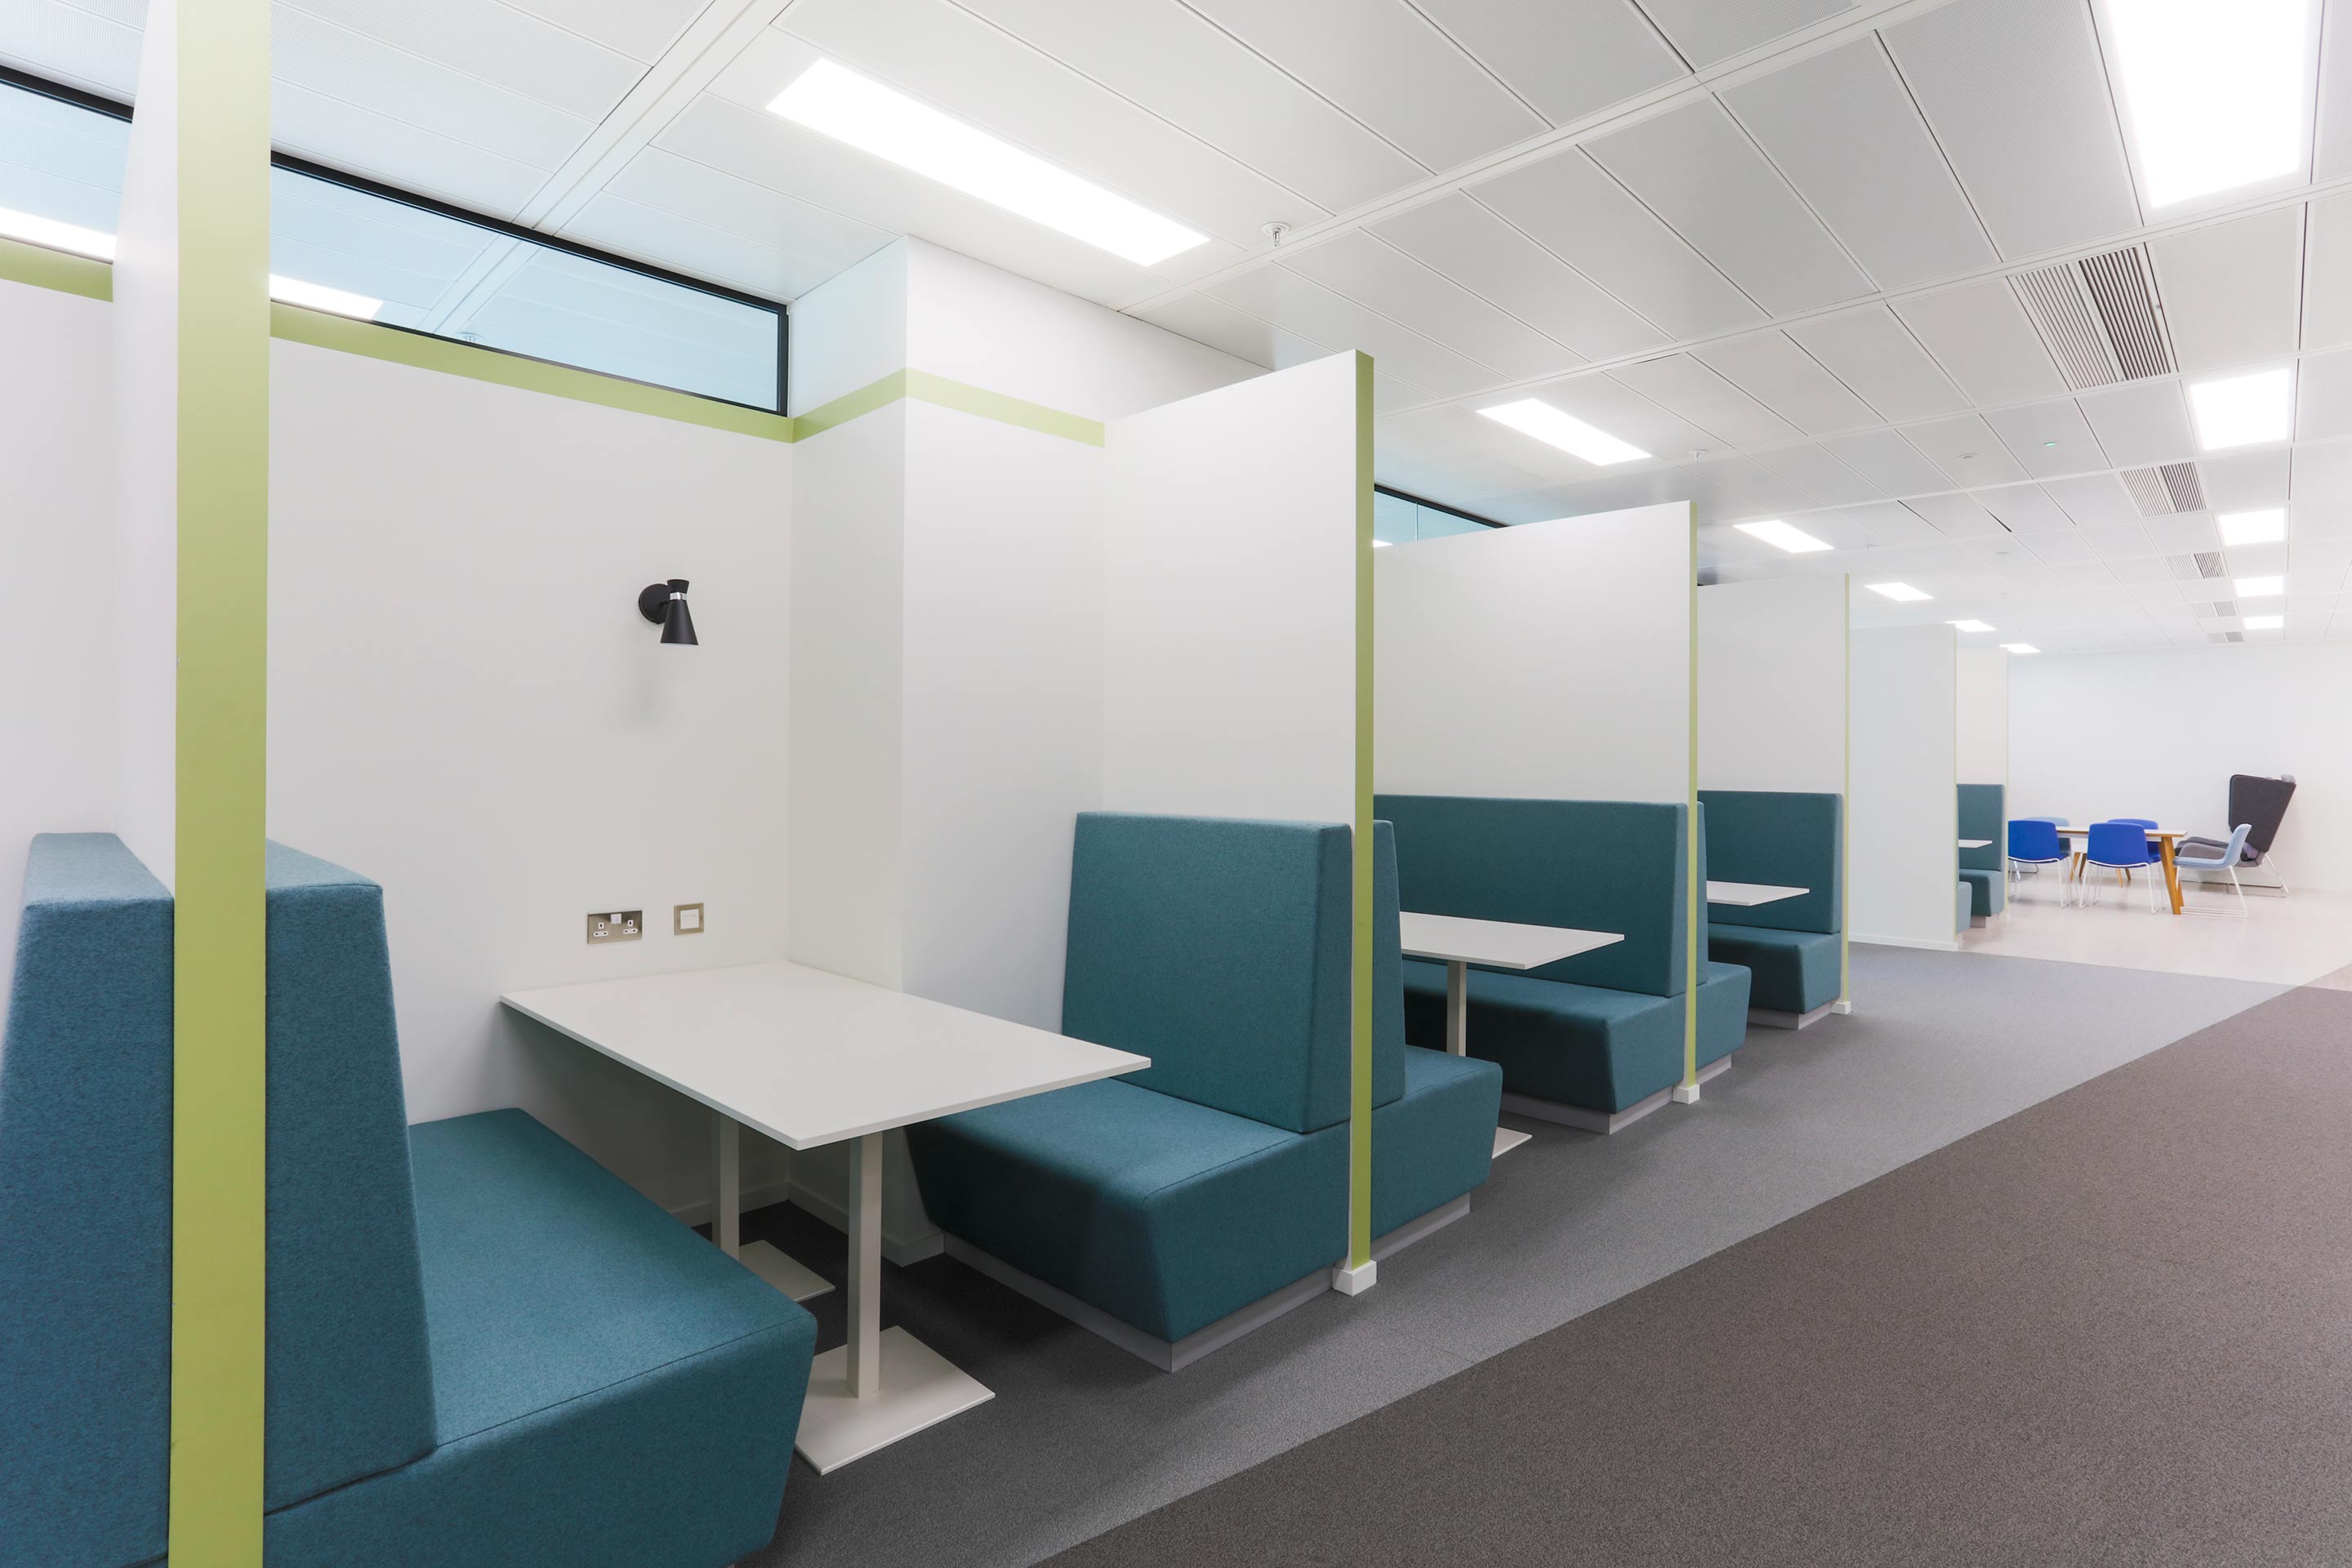 Collaboration and meeting booths incorporated into the design